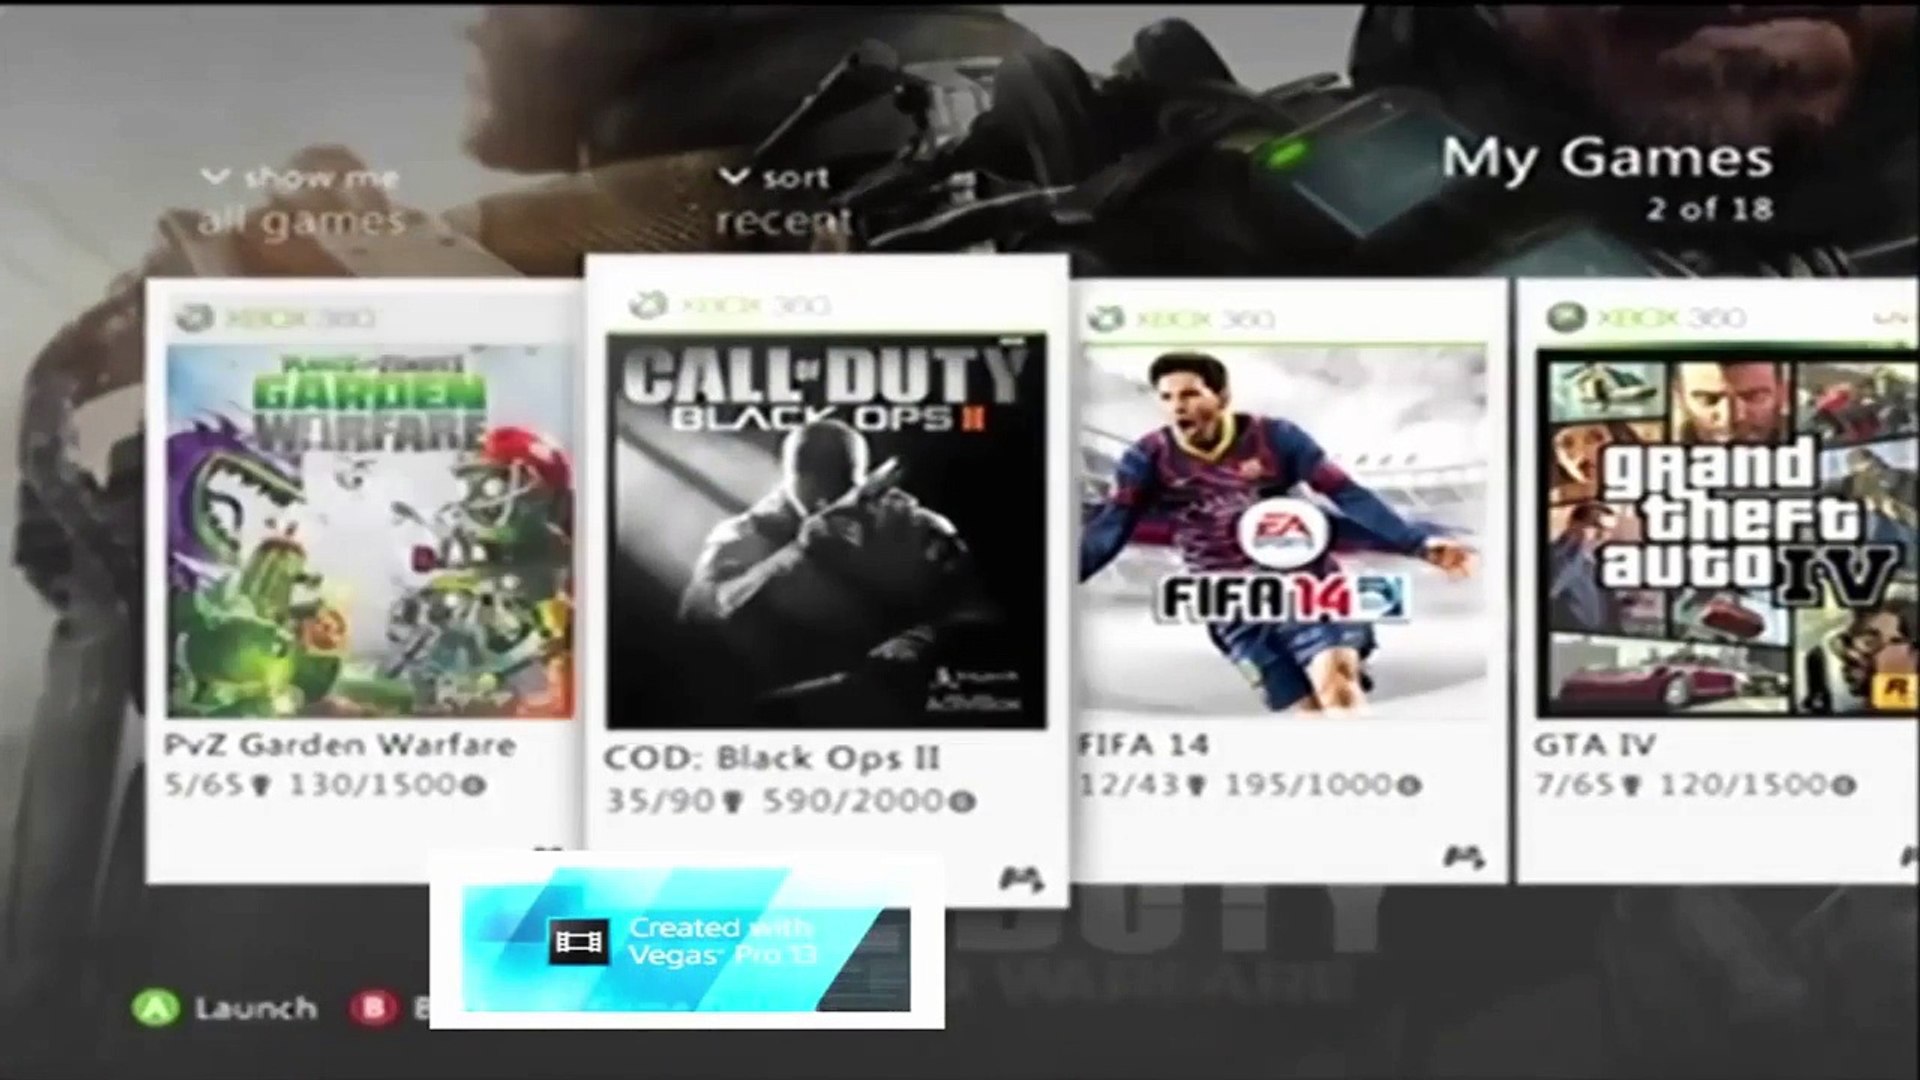 How To Mod Xbox 360 Games With USB - video Dailymotion